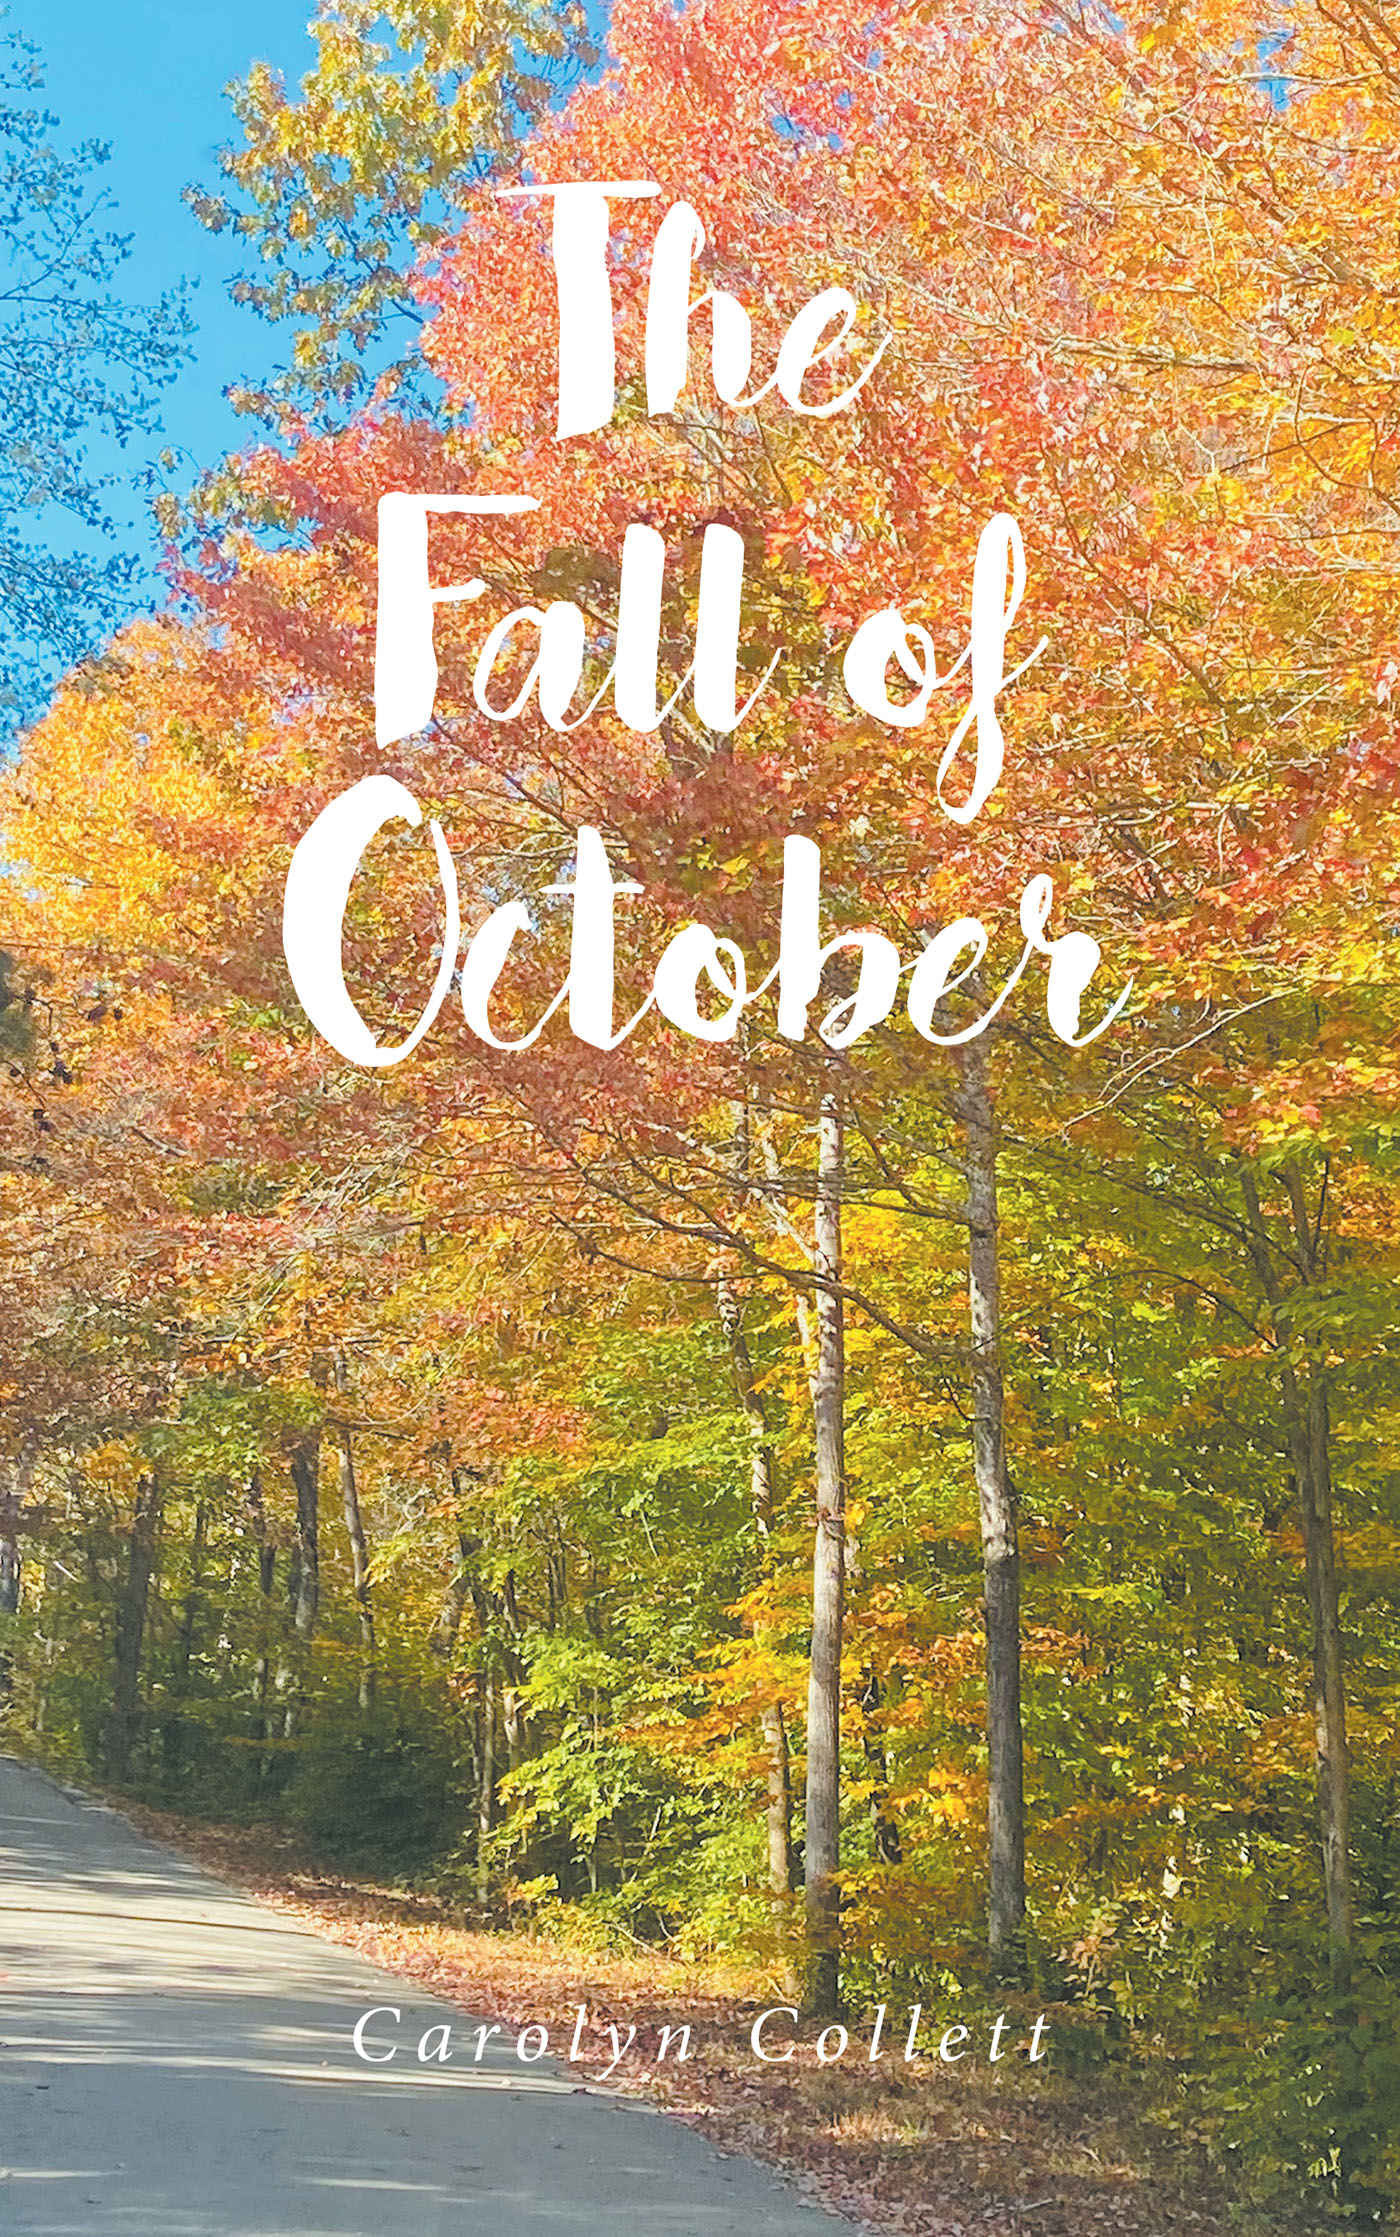 Author Carolyn Collett’s New Book, "The Fall of October," Shares Stories of How Angels Will Come to Anyone, Even Through Life’s Heartbreak, Triumph, and Happiness